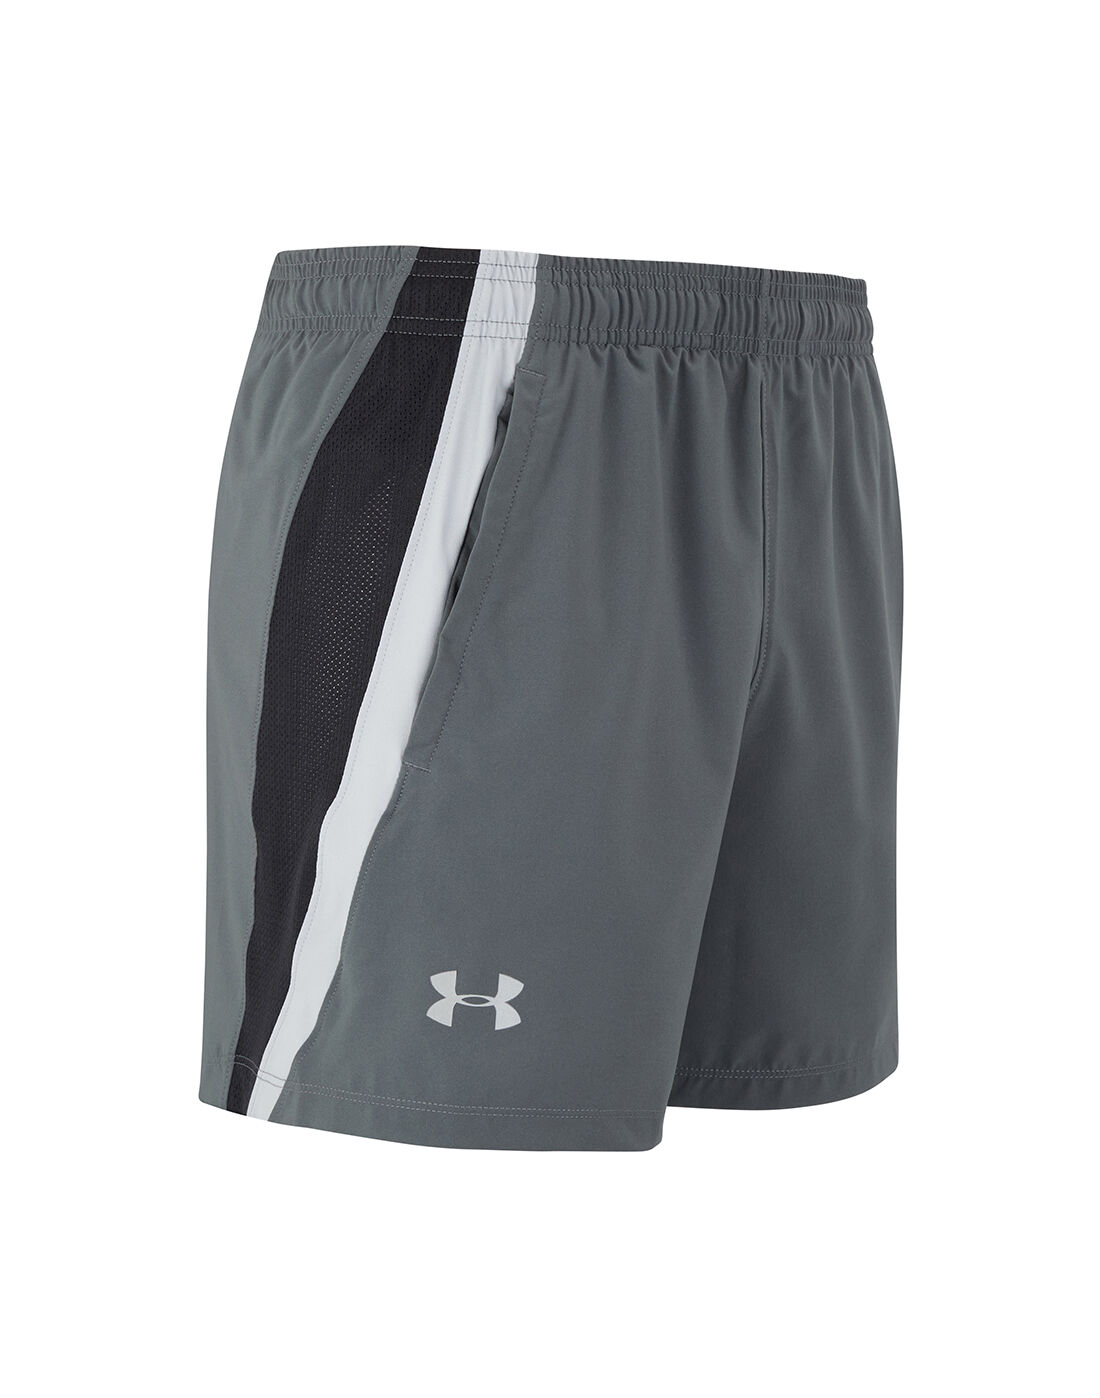 under armour shorts 5 inch